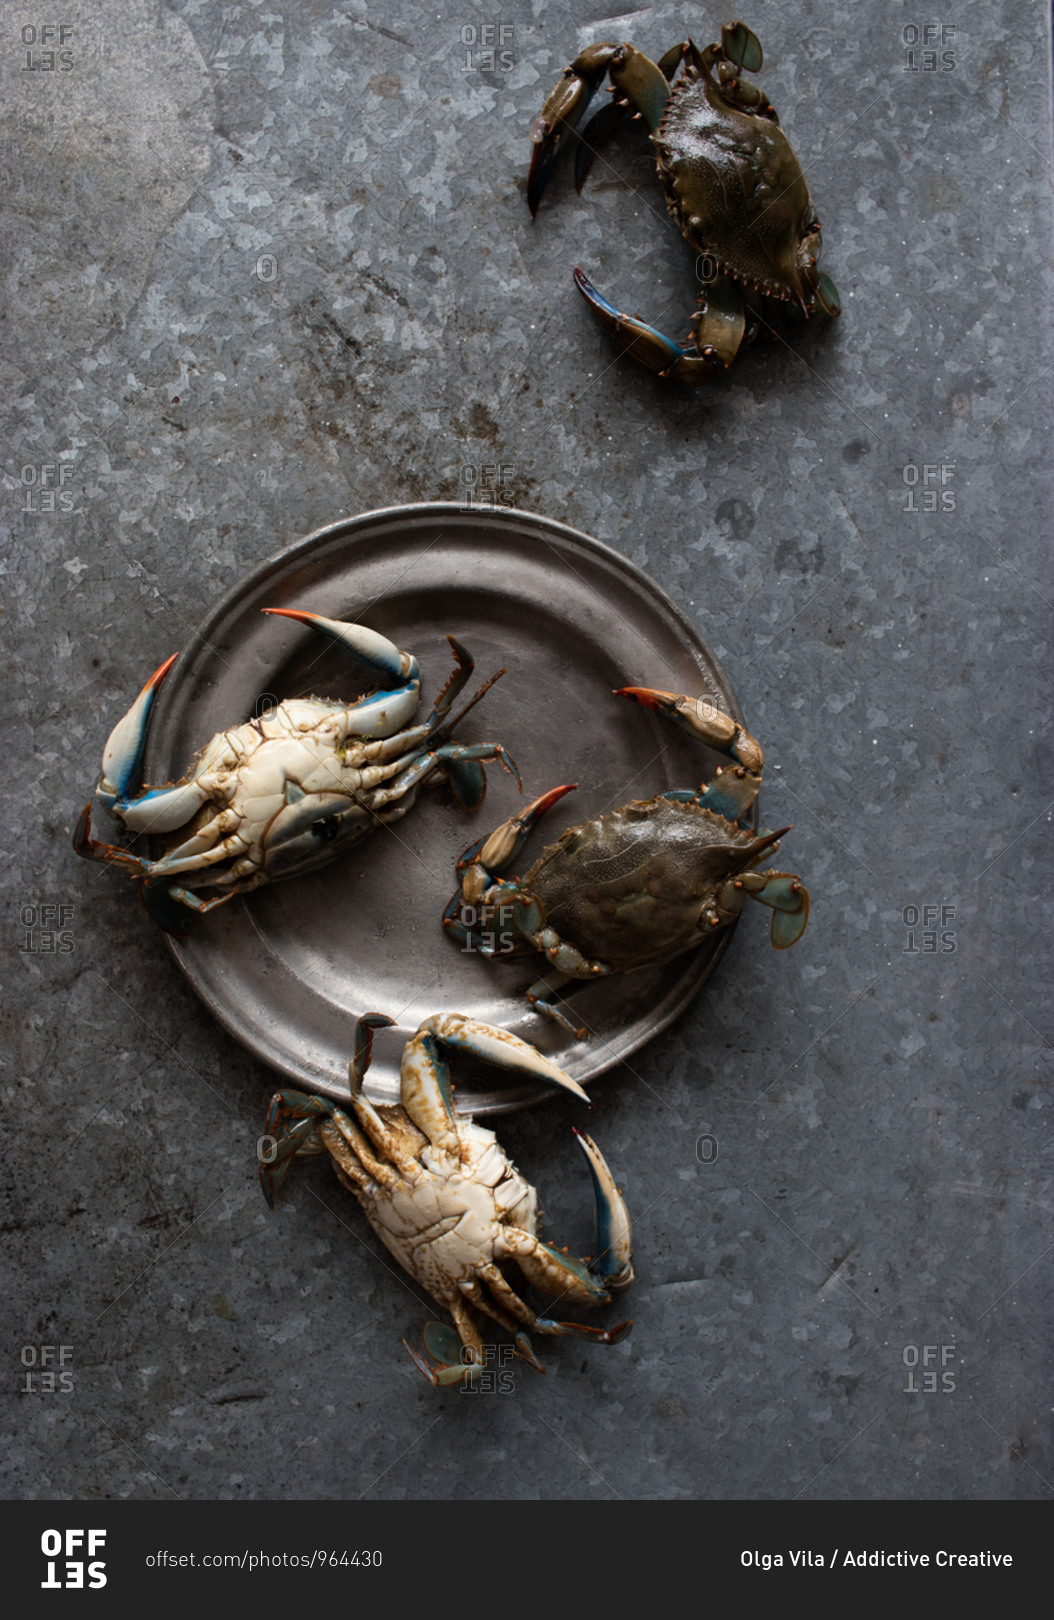 From above crabs placed on a metal plate on dark background